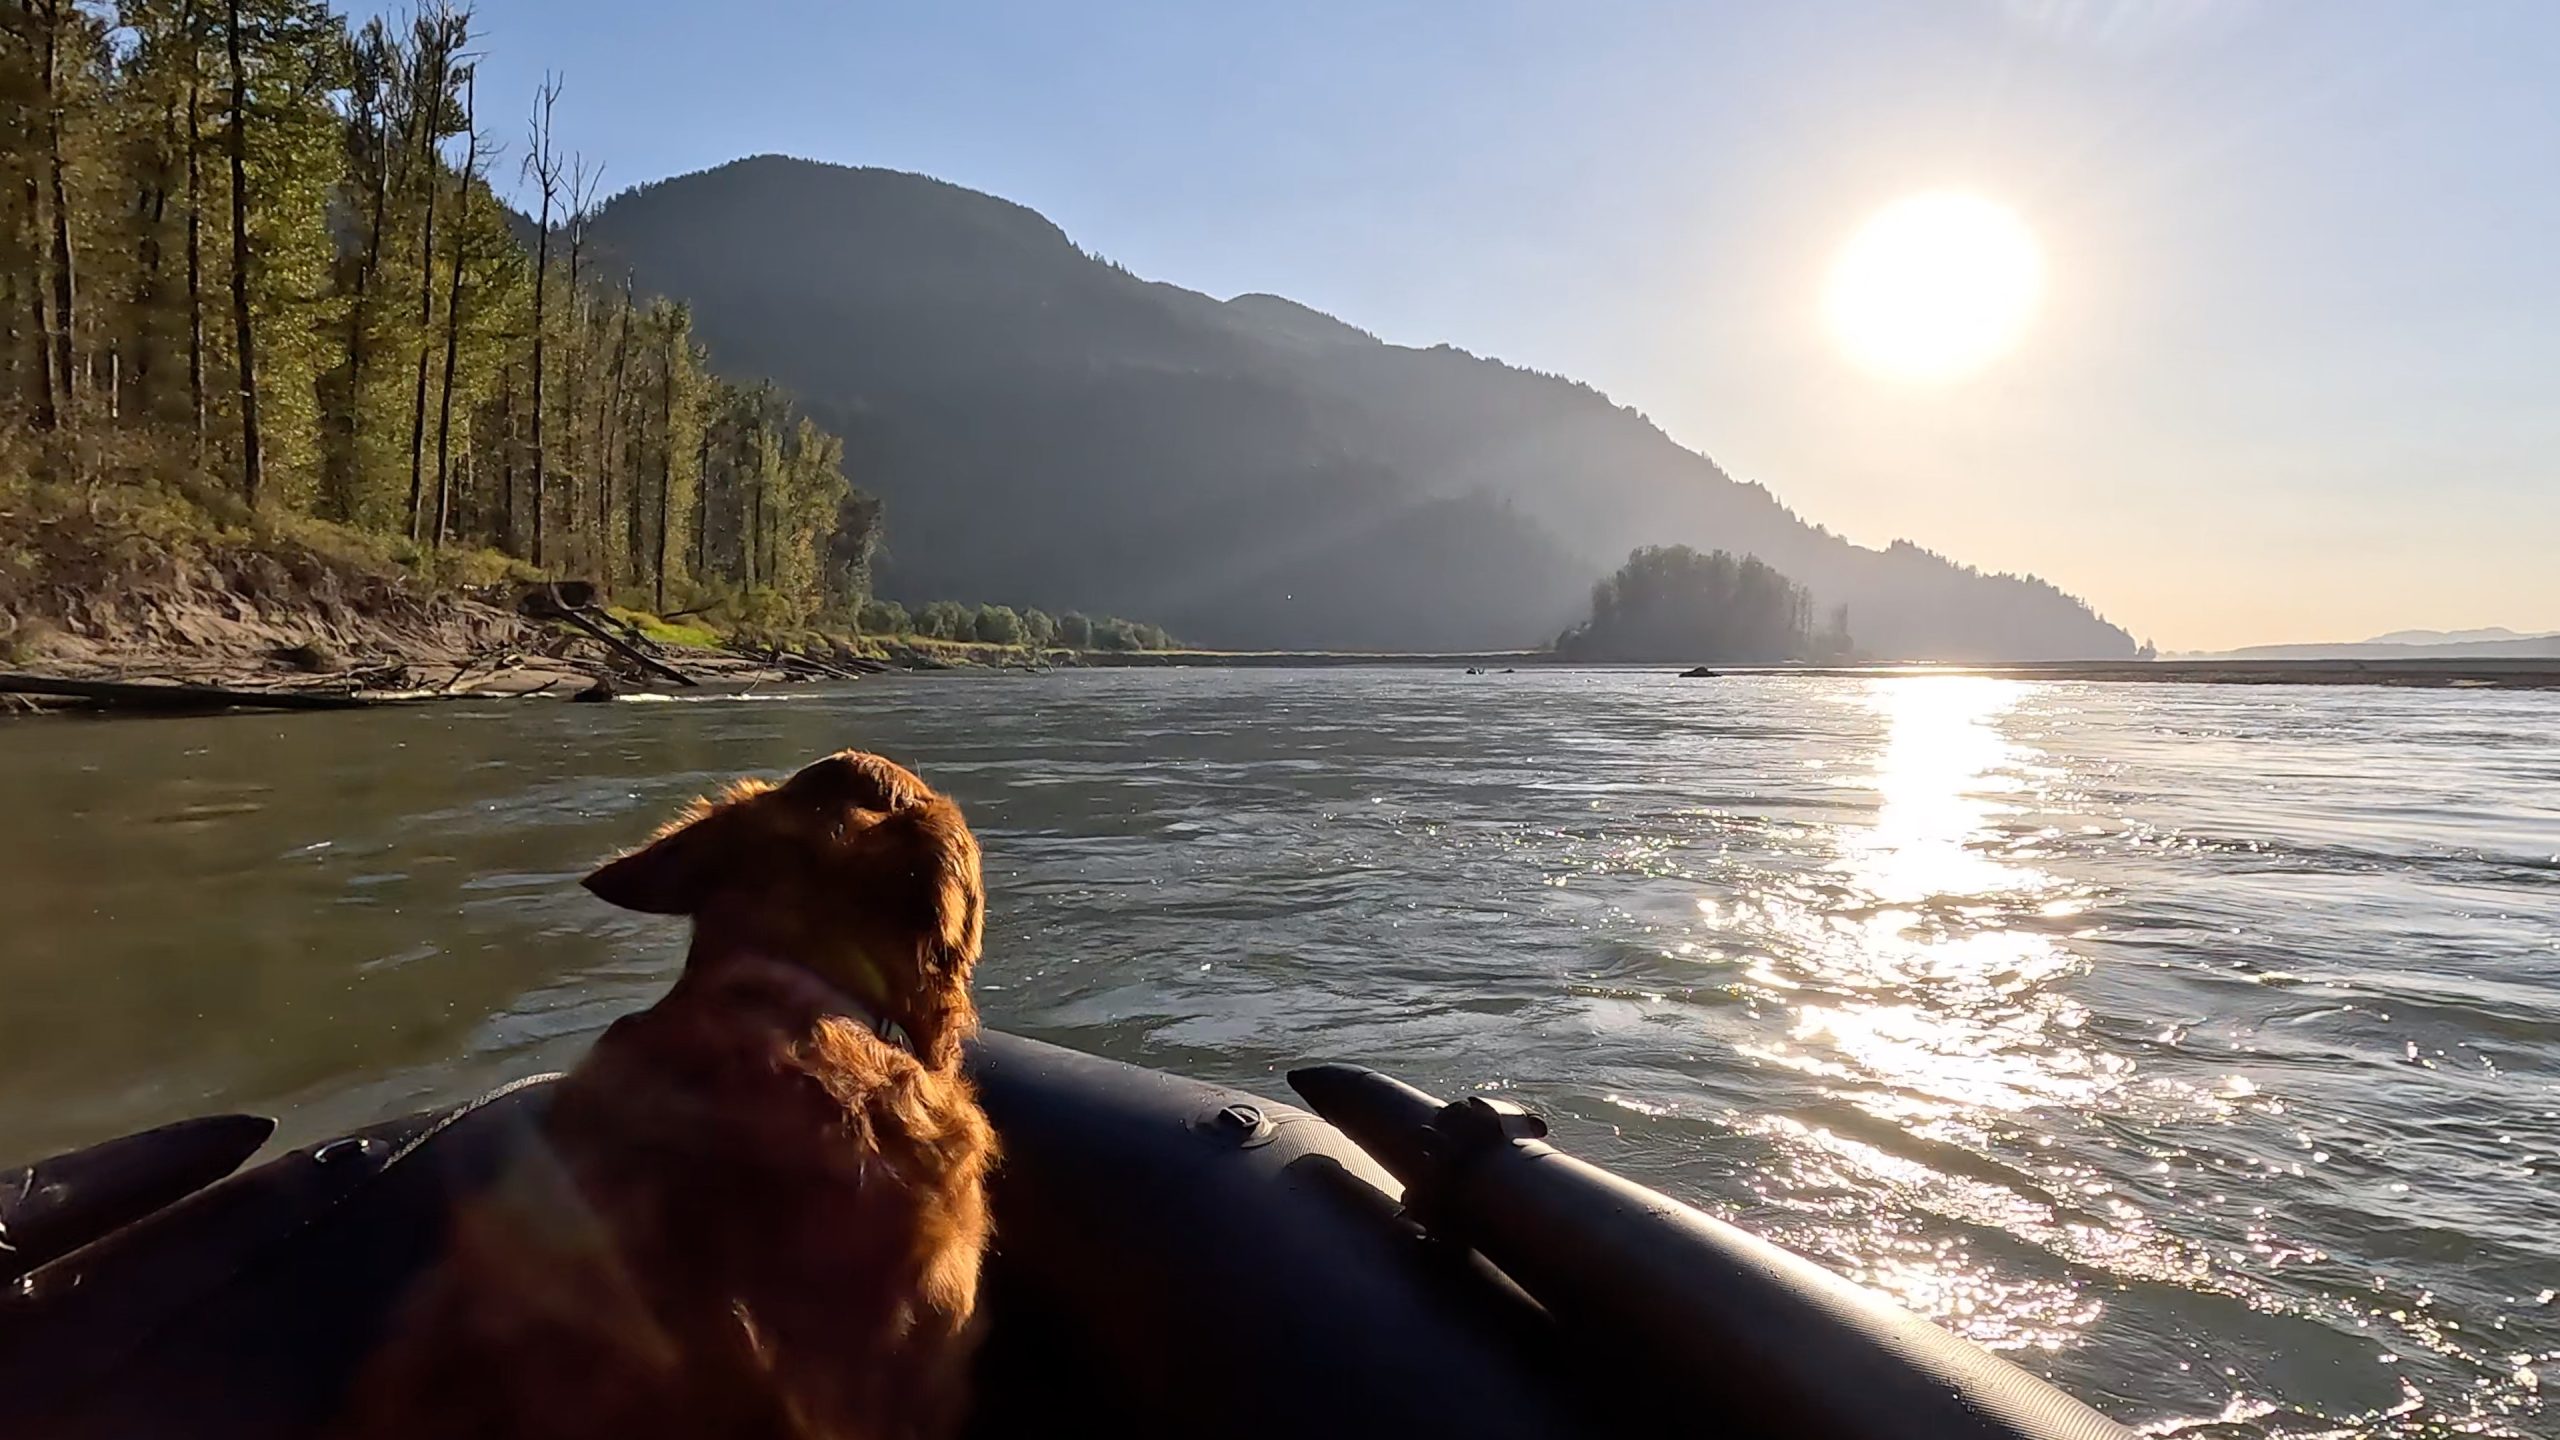 dog on an inflatable boat enjoying the view on a beautiful day on the waters of beautiful British Columbia